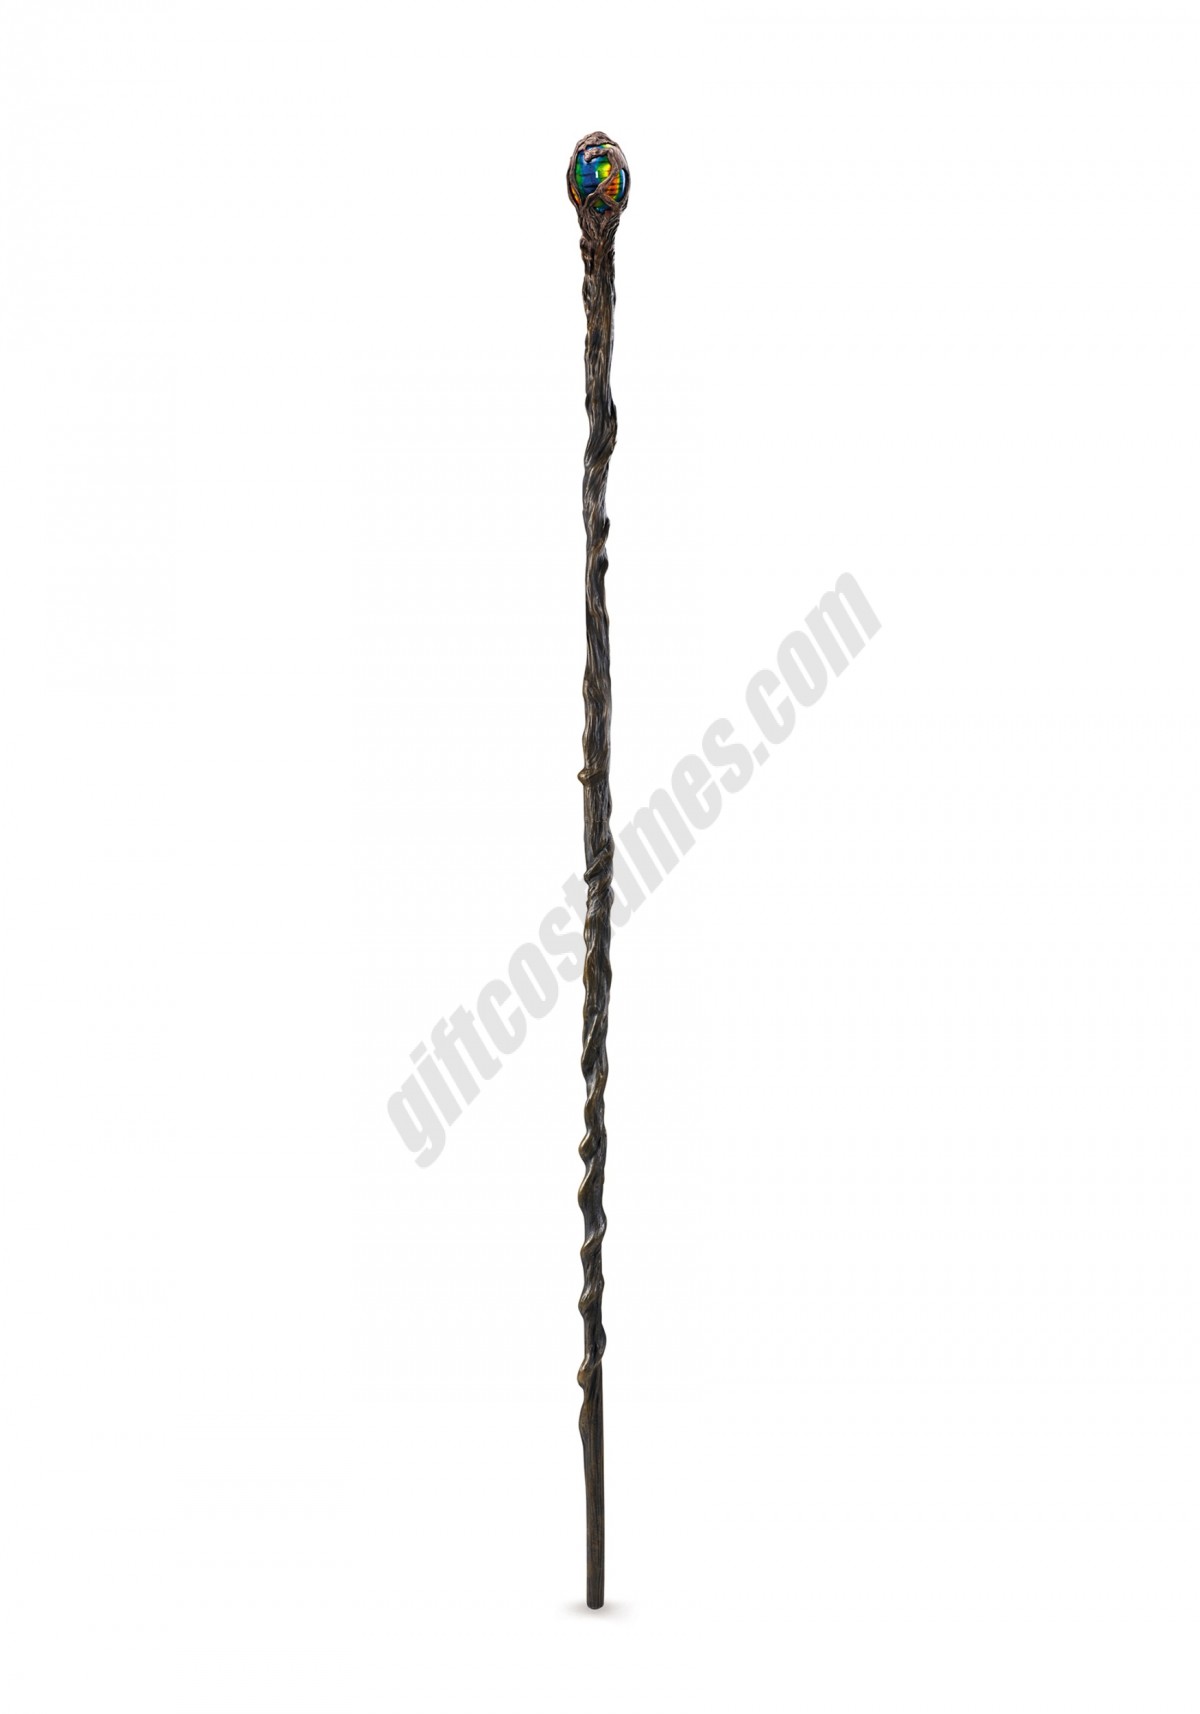 Deluxe Maleficent Glowing Staff Promotions - -0